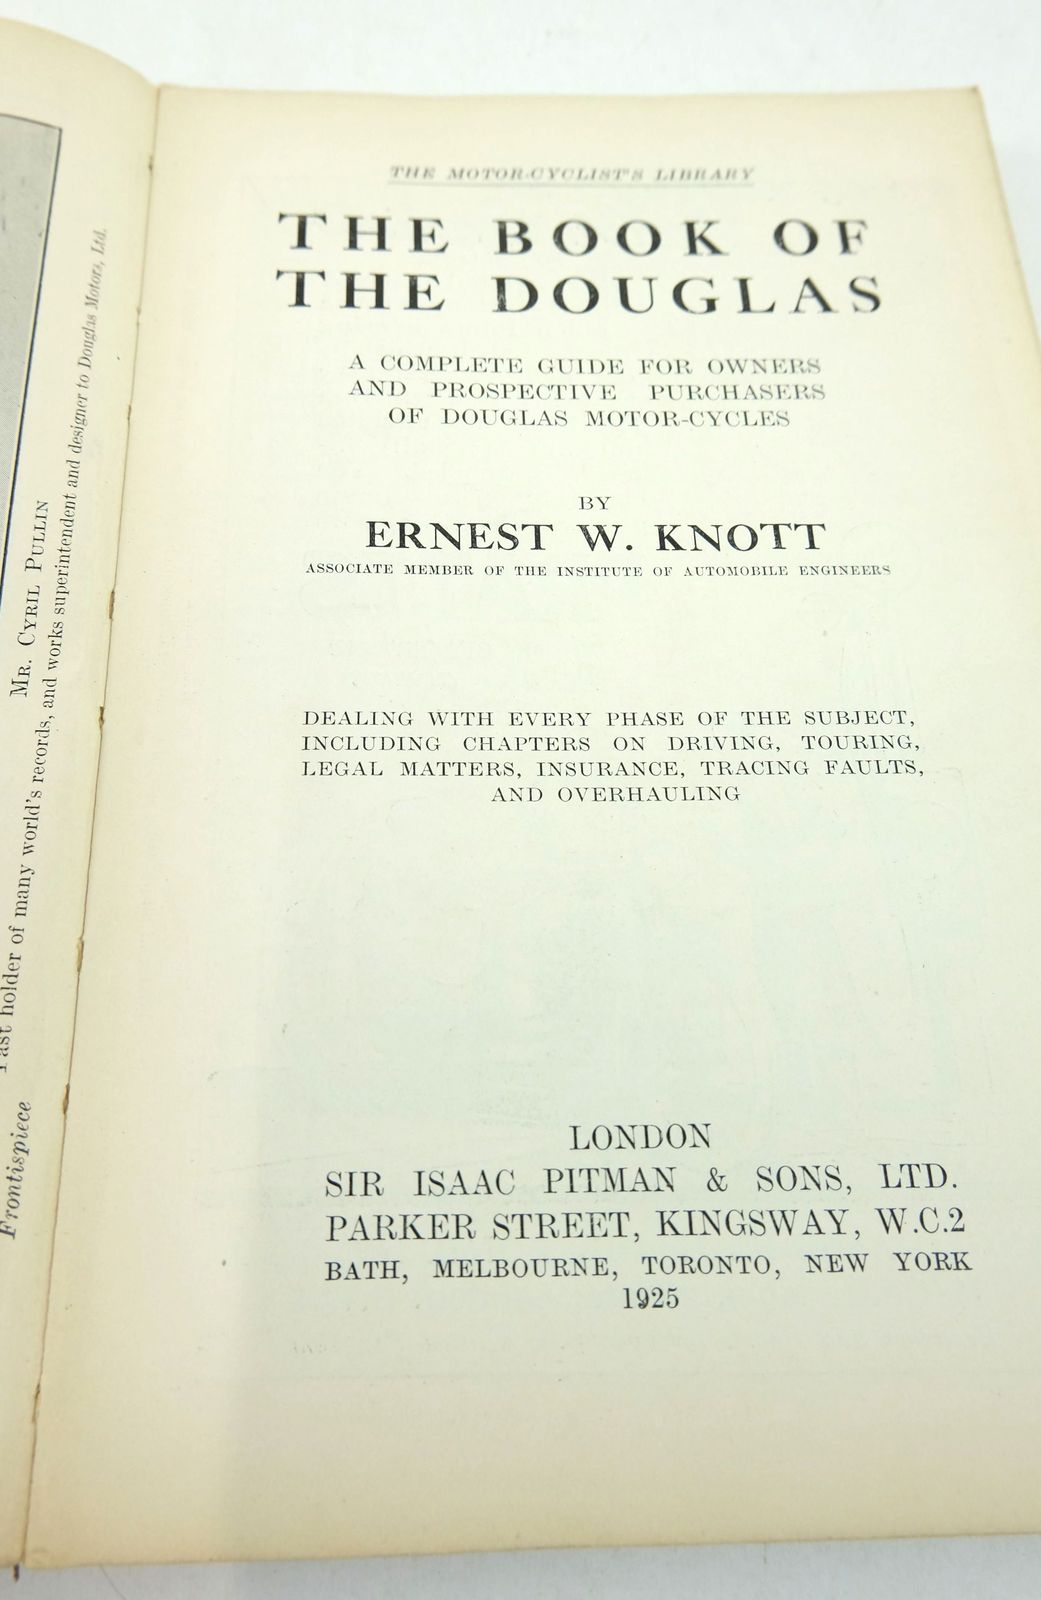 Photo of THE BOOK OF THE DOUGLAS (THE MOTOR-CYCLIST'S LIBRARY) written by Knott, Ernest W. published by Sir Isaac Pitman & Sons Ltd. (STOCK CODE: 1819461)  for sale by Stella & Rose's Books